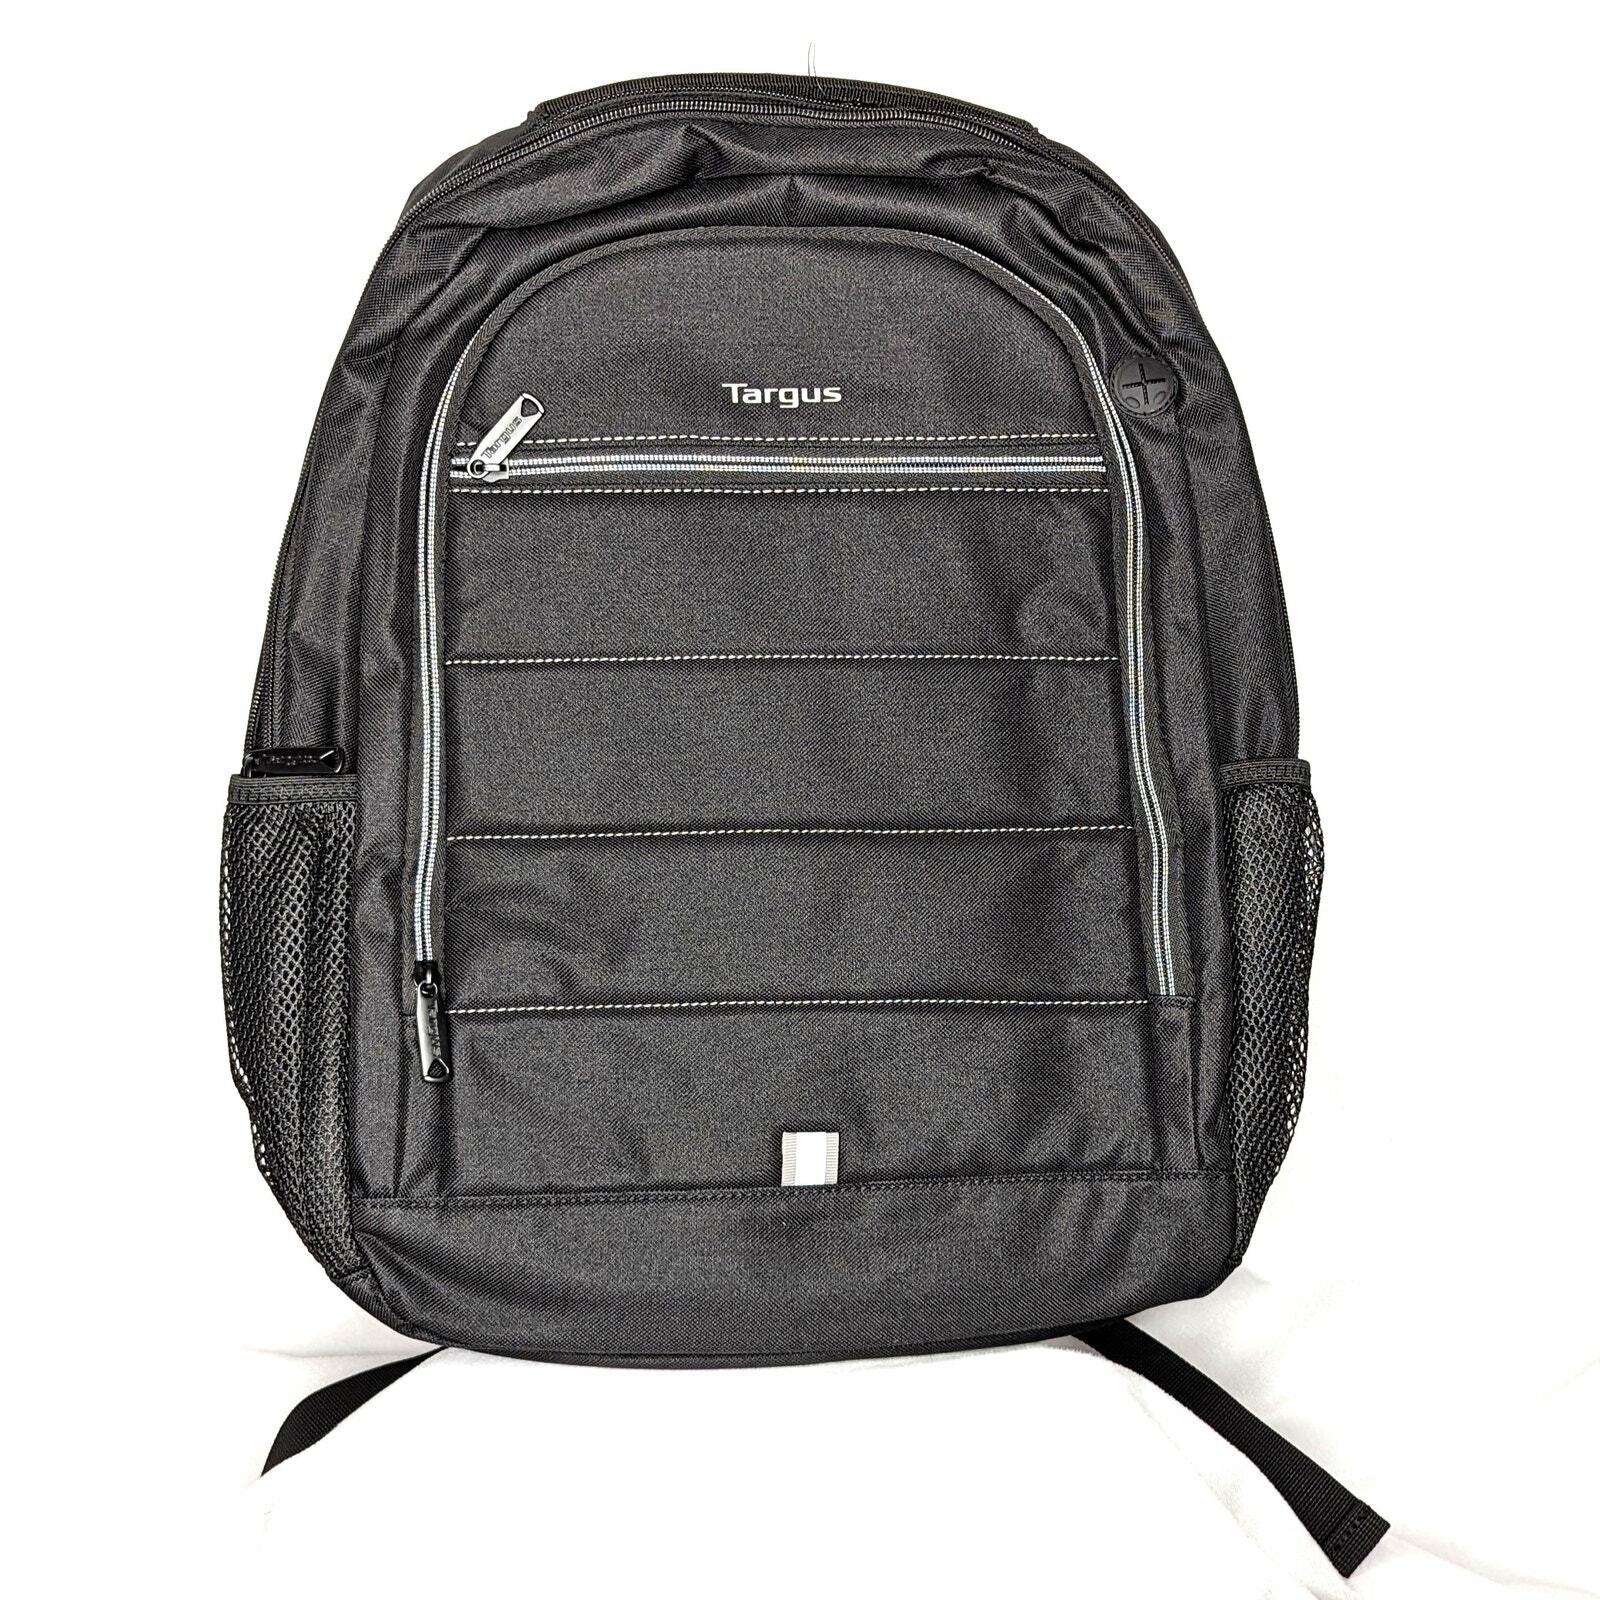 Targus 19L Laptop Backpack - 15.6” - Black - New with Tags